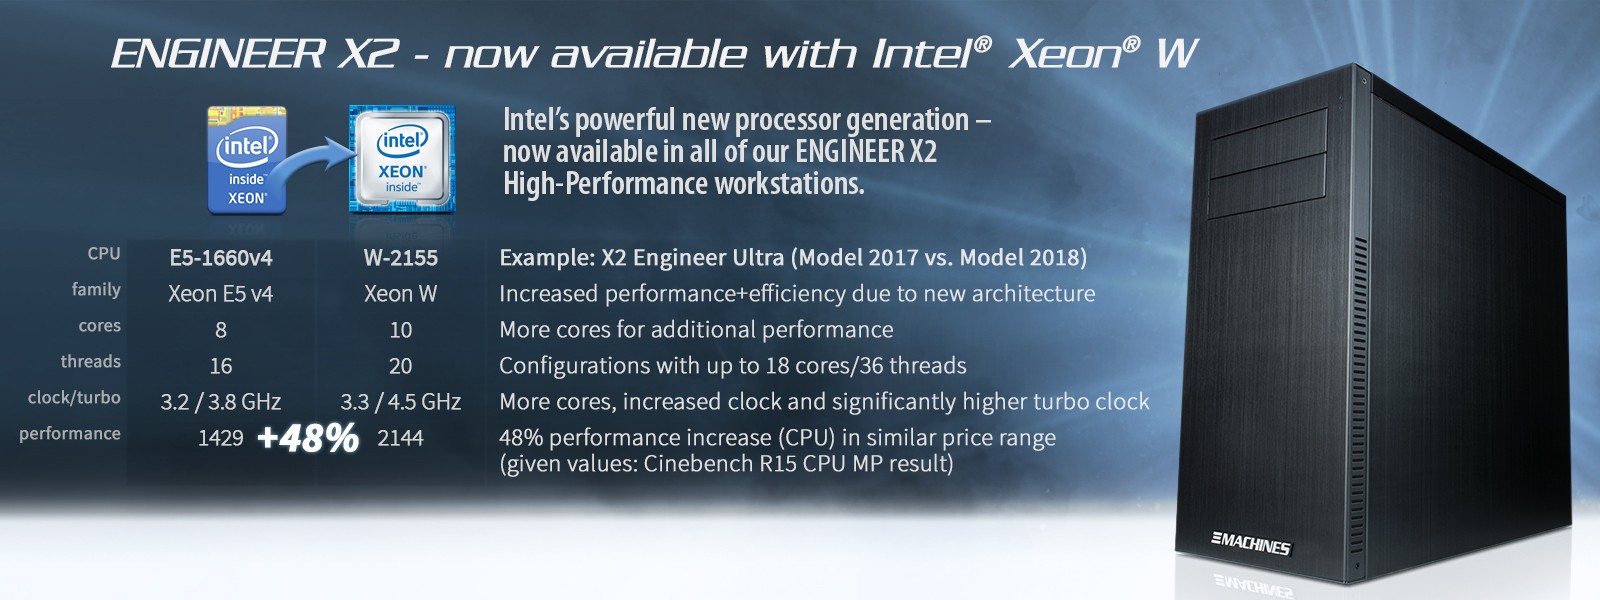 ENGINEER X2 WORKSTATIONS with Intel´s newest CPU generation Xeon W